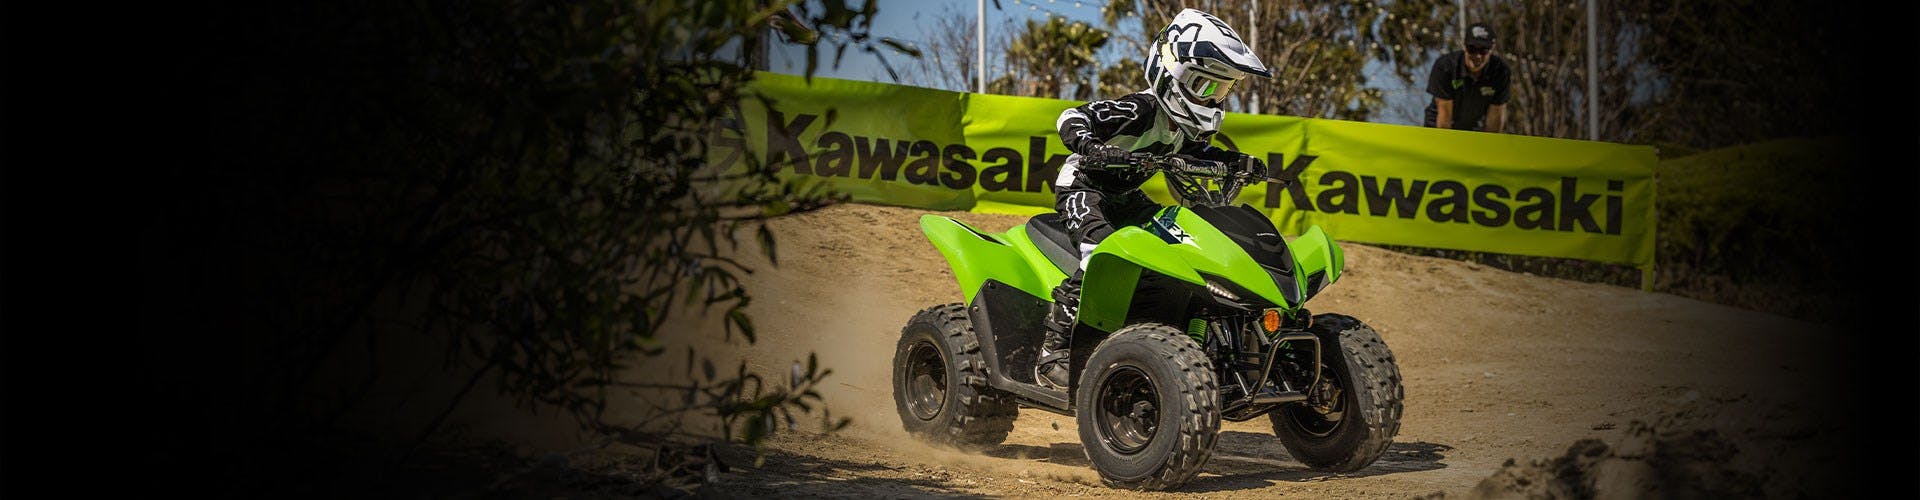 Kawasaki KFX90 in lime green colour on off road track